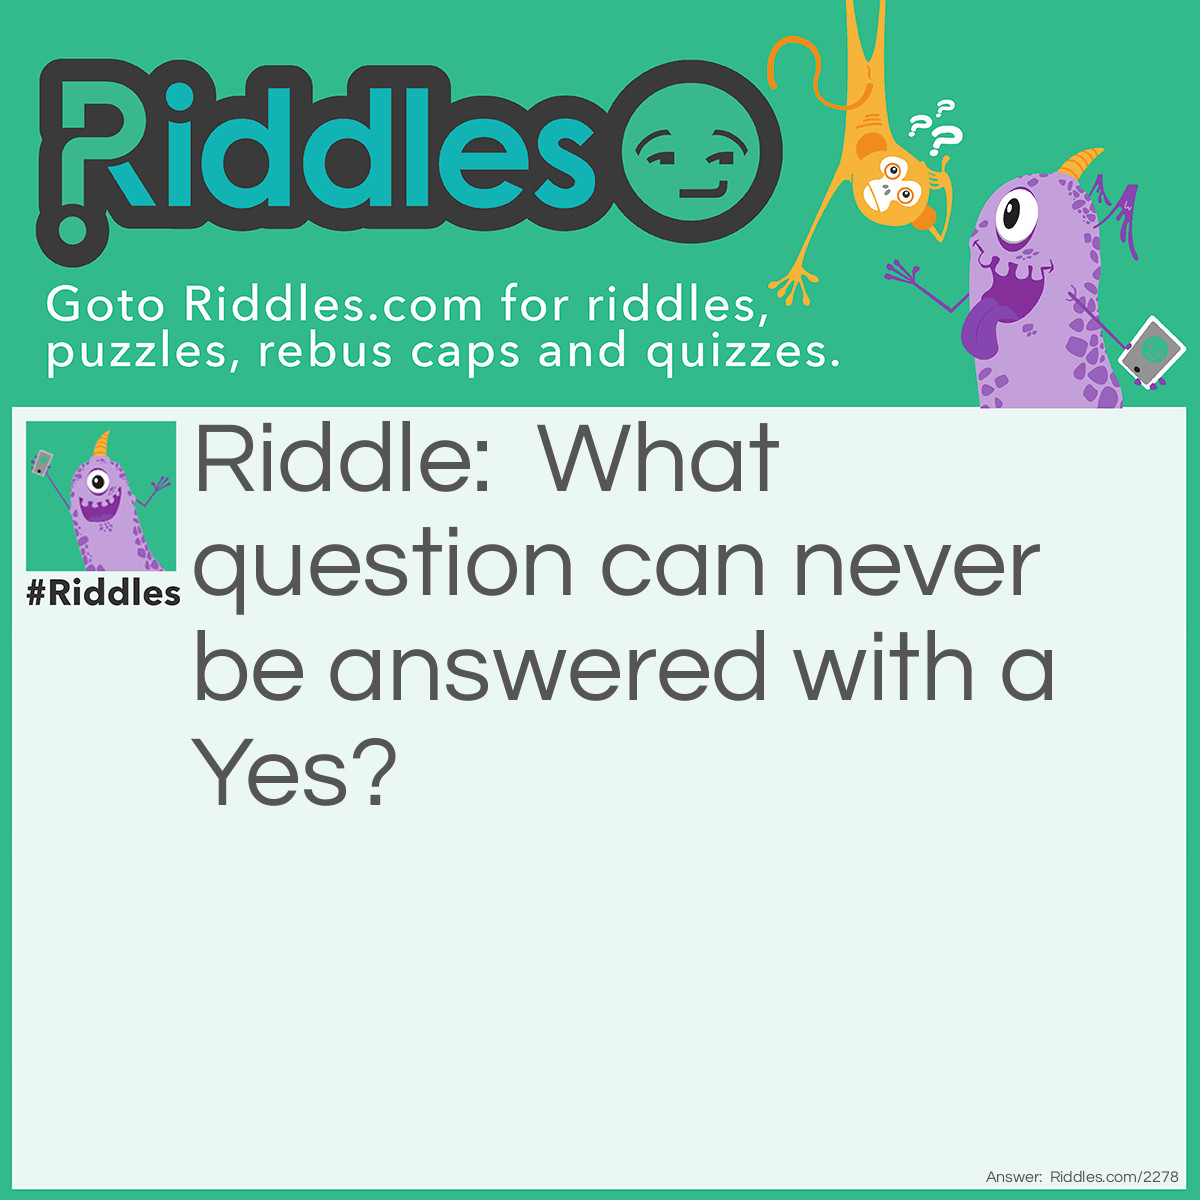 Riddle: What question can never be answered with a Yes? Answer: Are you asleep?